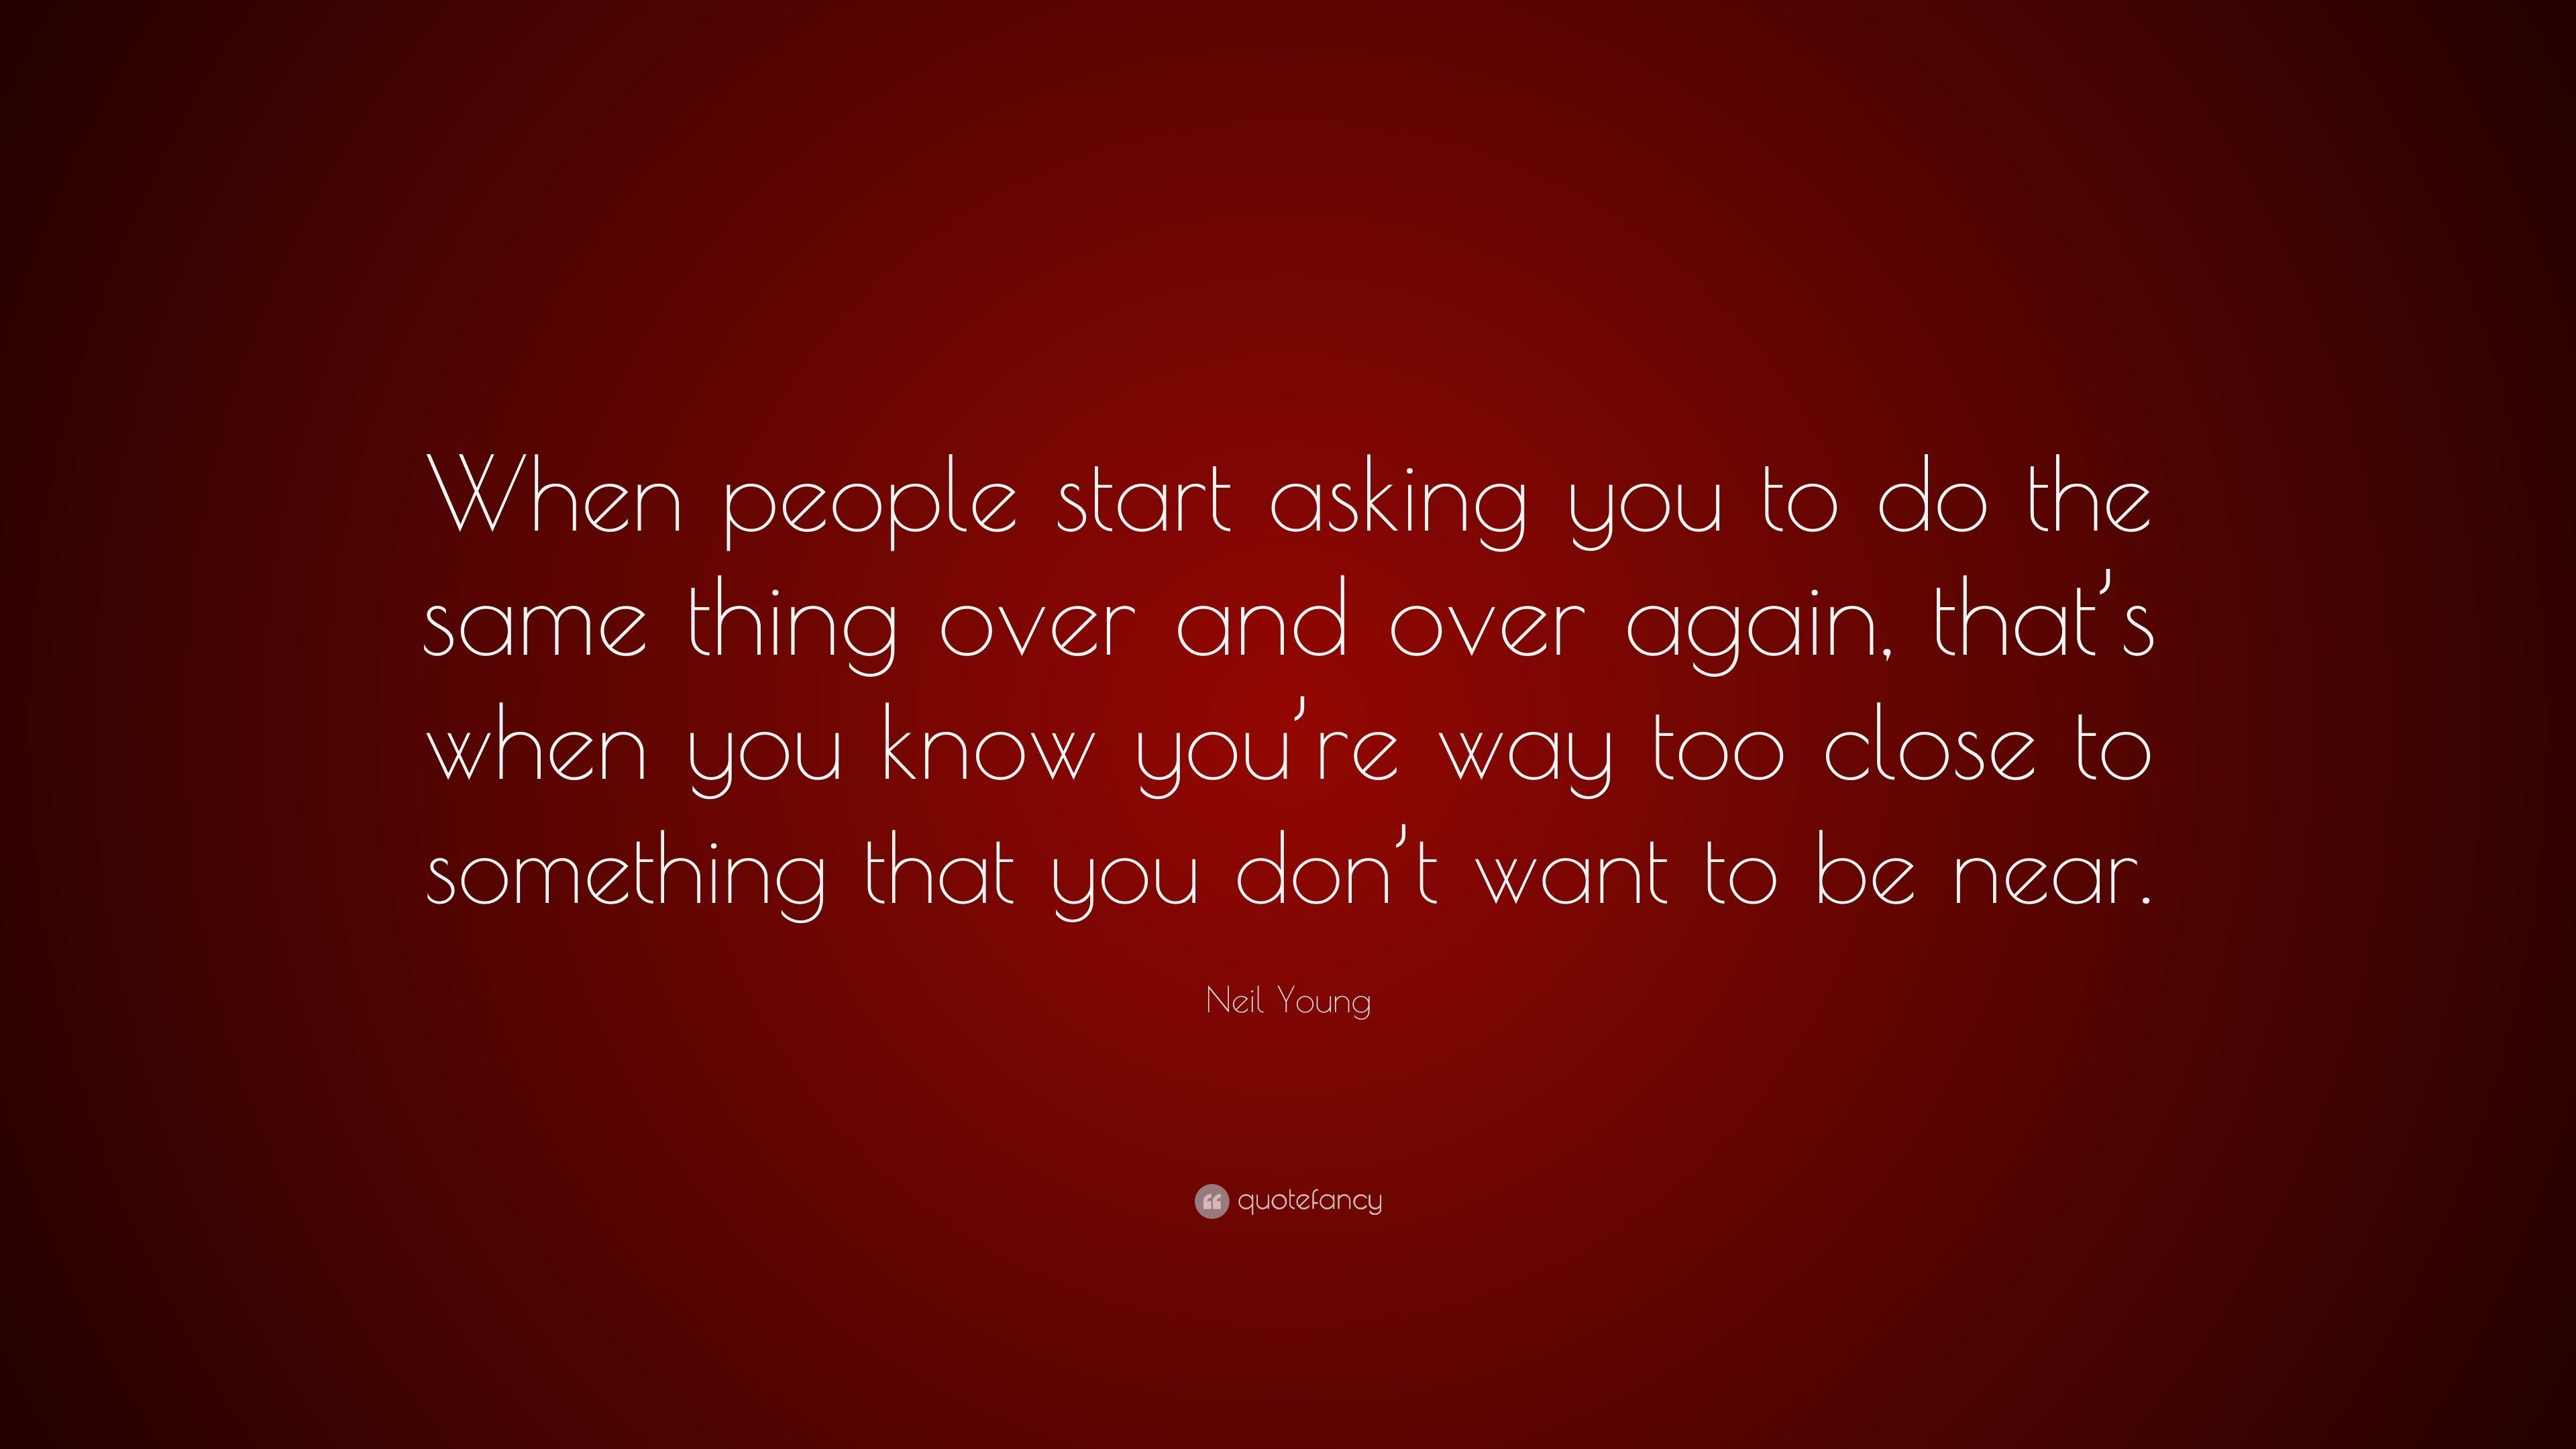 Neil Young Quote: “When people start asking you to do the same